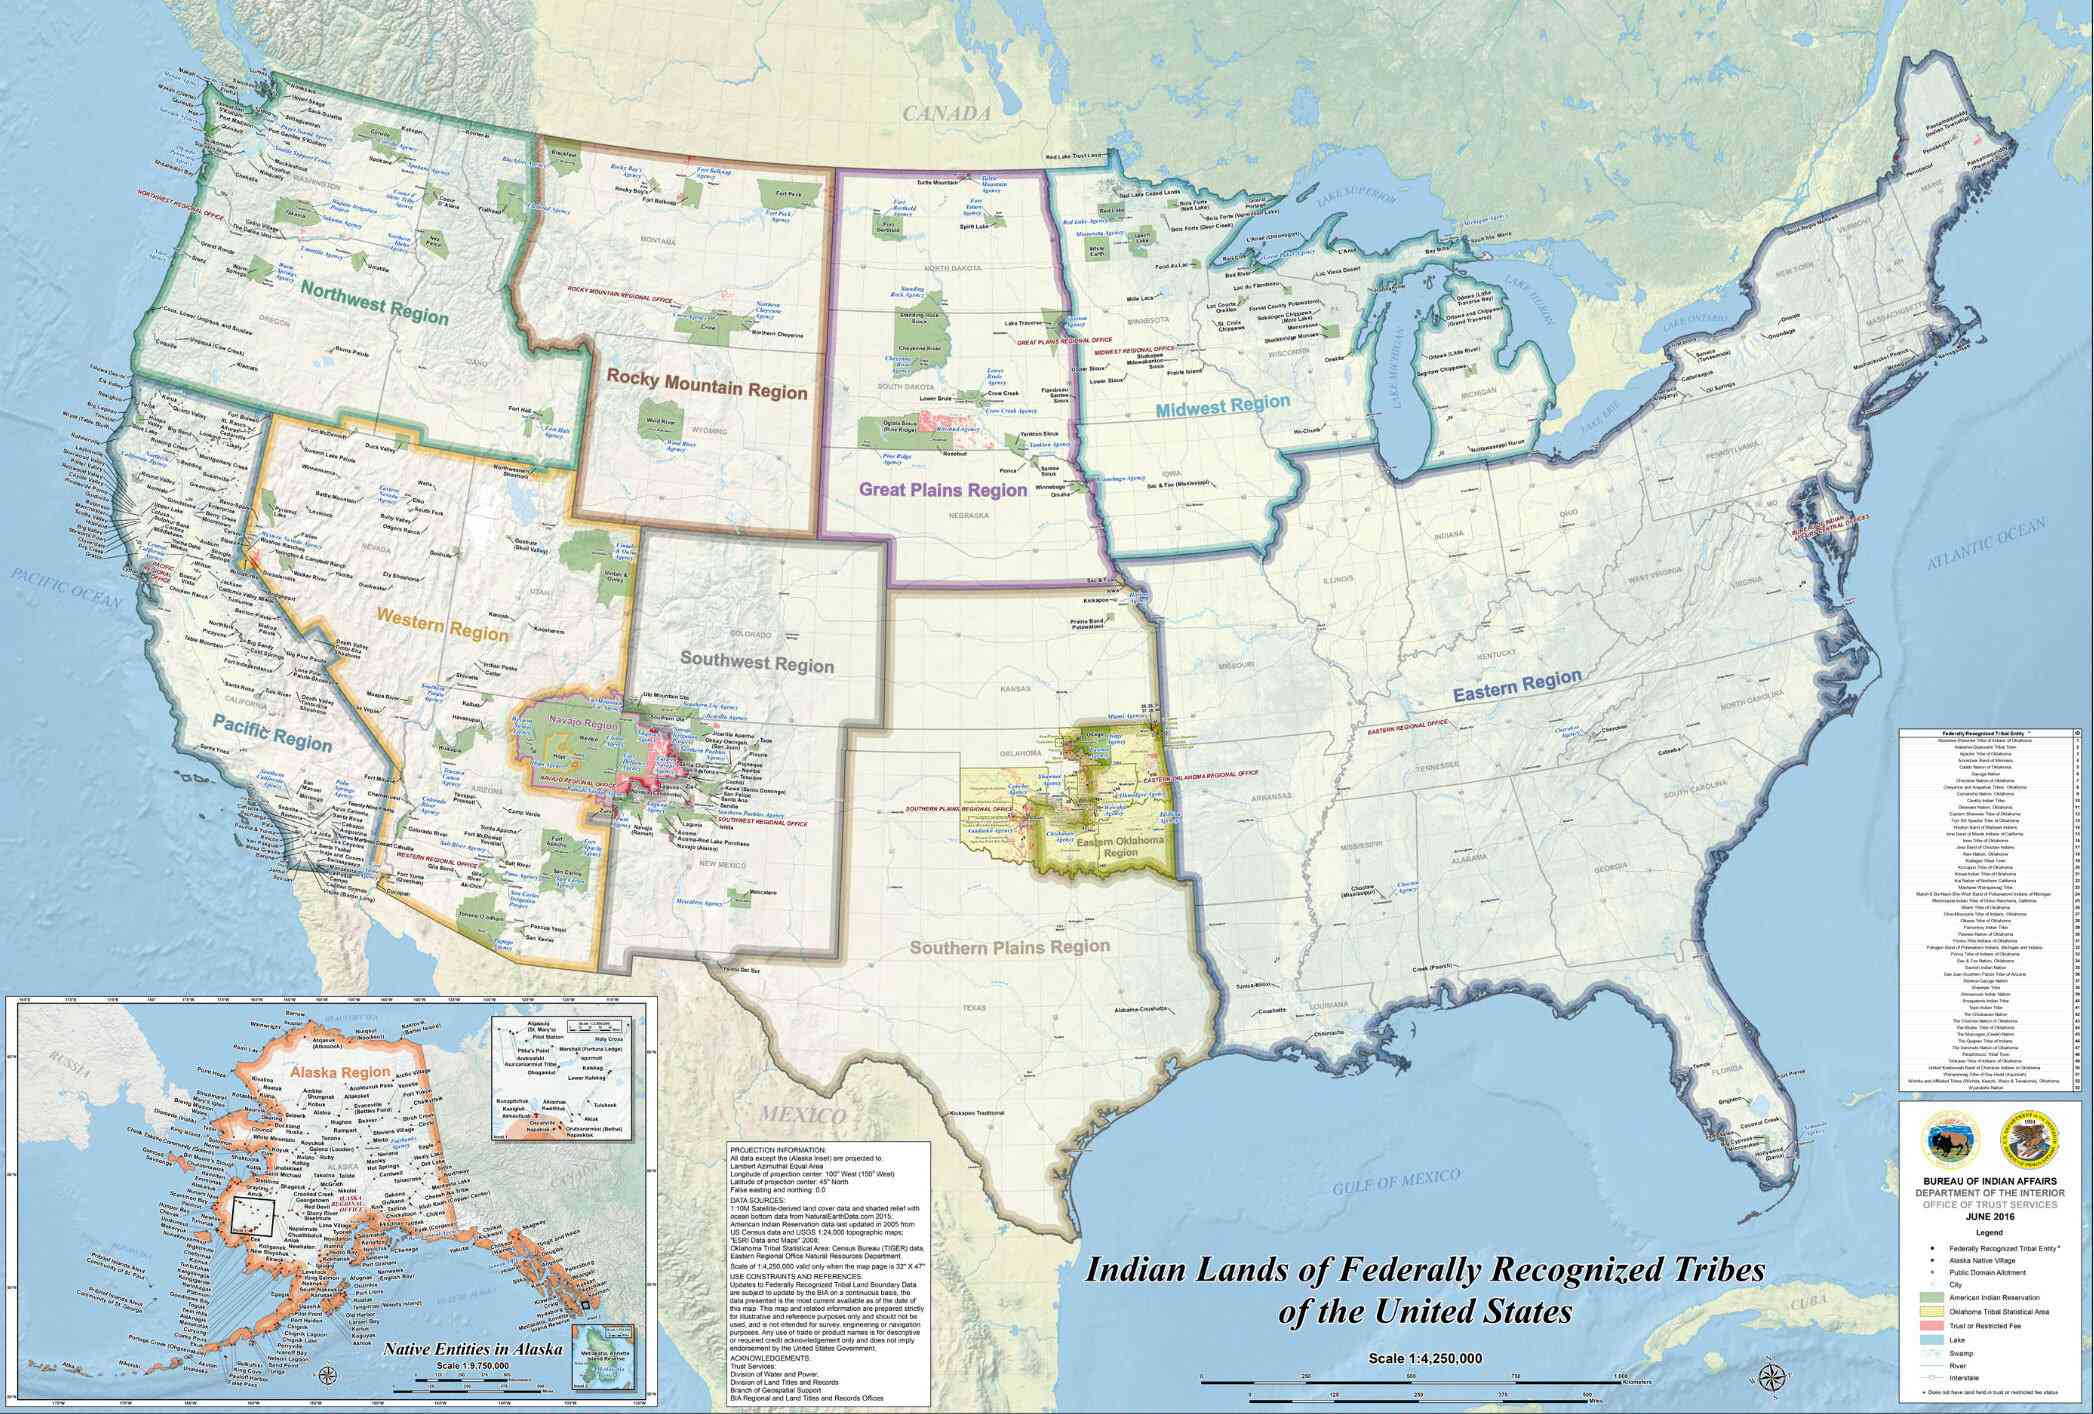 Federal map of “Indian Lands of Federally Recognized Tribes of the United States”